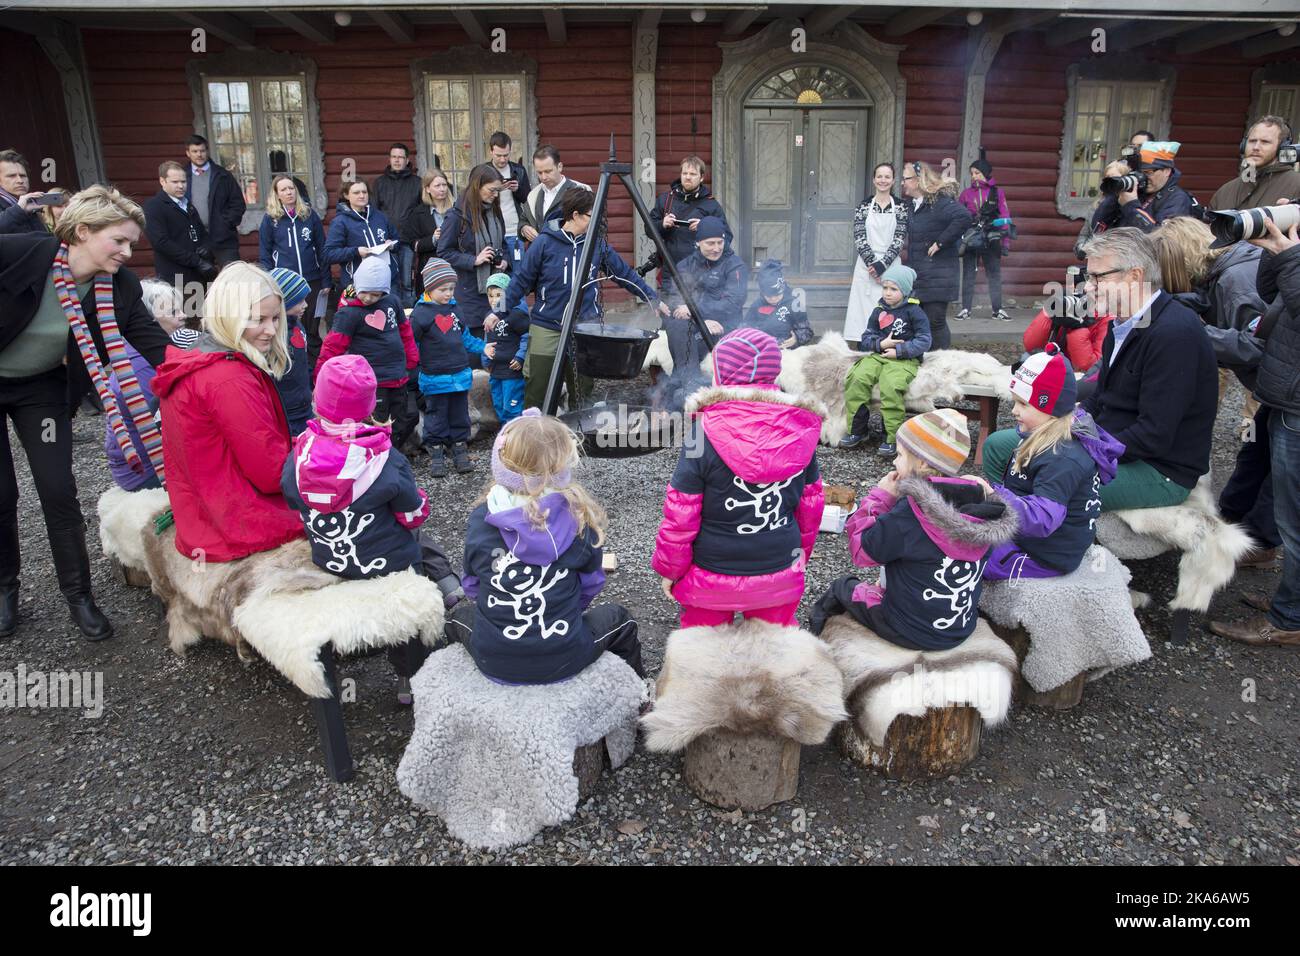 Oslo, Norway 20150310. Crown Princess Mette-Marit and the Mayor of Oslo, Fabian Stang attends Kindergarten Day and meets children from 'Steinroysa' Kindergarten in 'Geitmyra' Food Culture Center in Oslo Tuesday. Photo: Haakon Mosvold Larsen / NTB scanpix Oslo Stock Photo